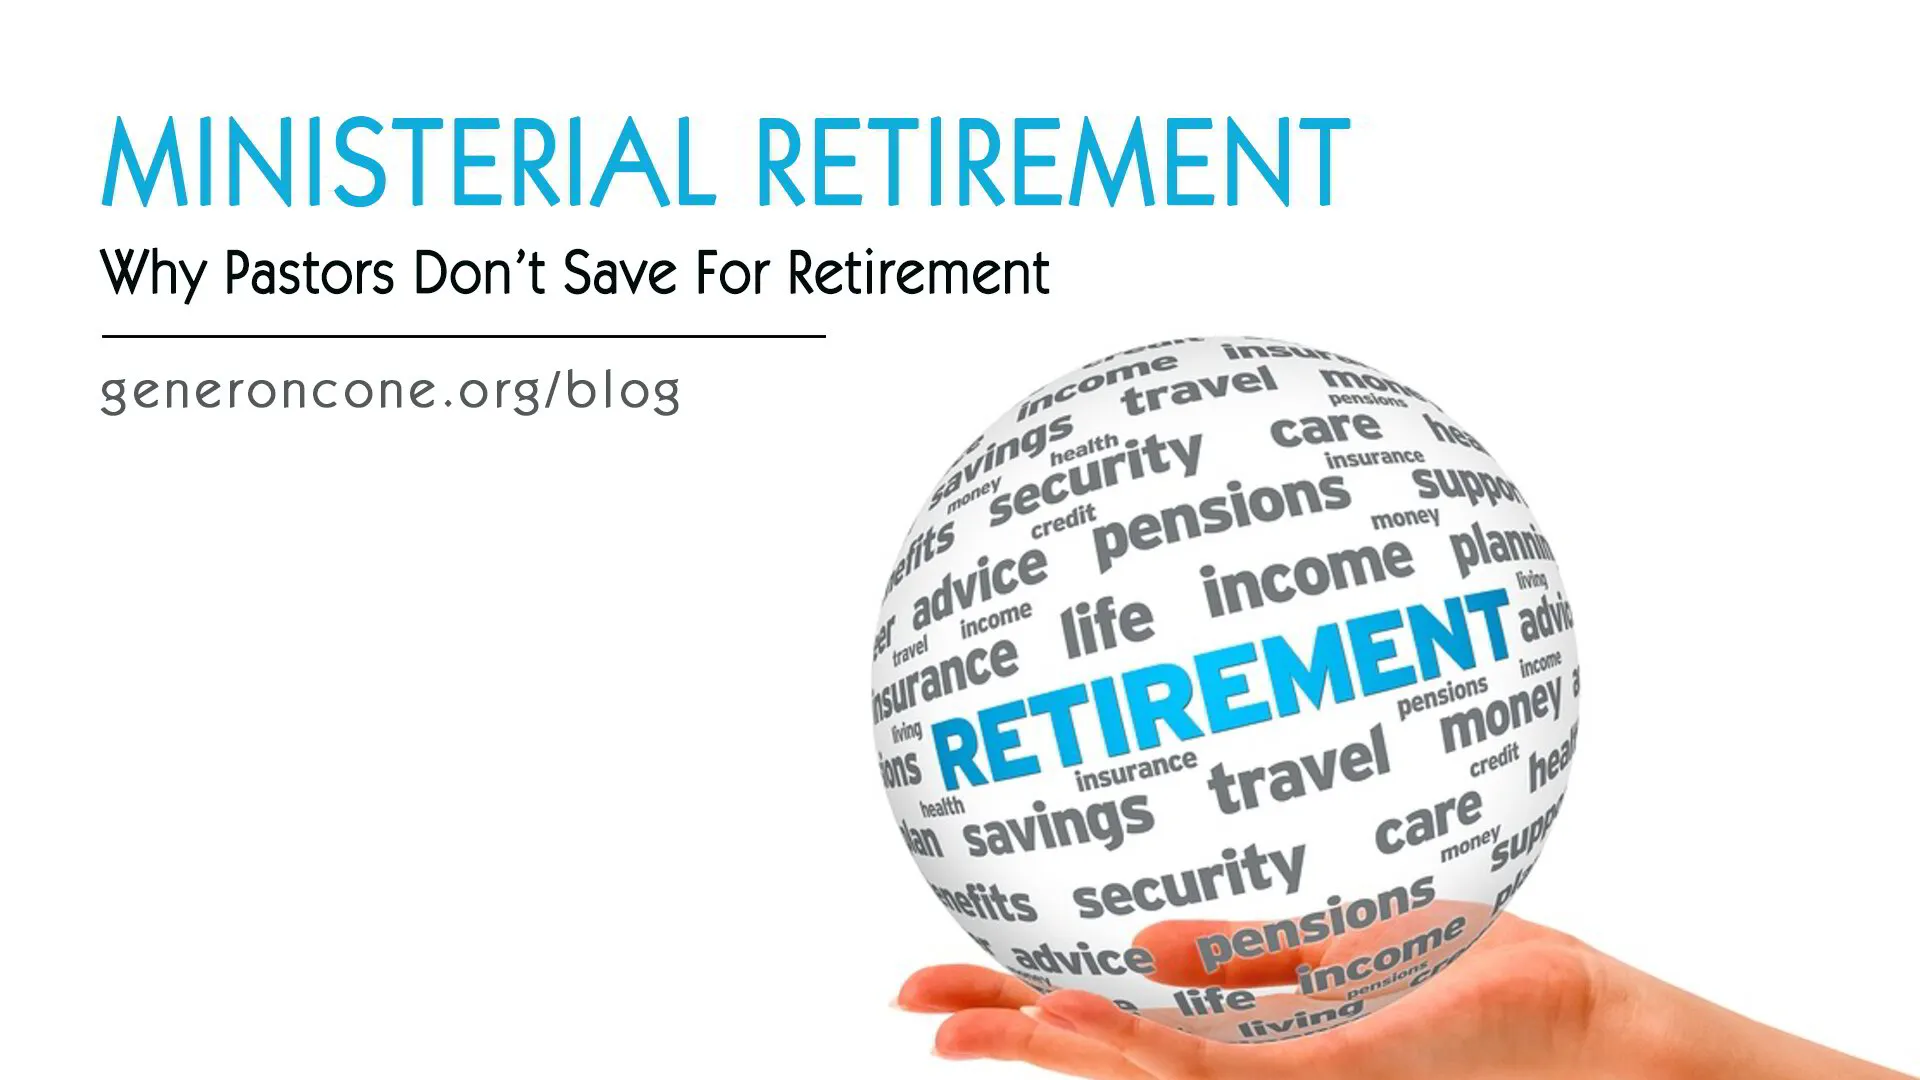 Why Pastors Don’t Save for Retirement